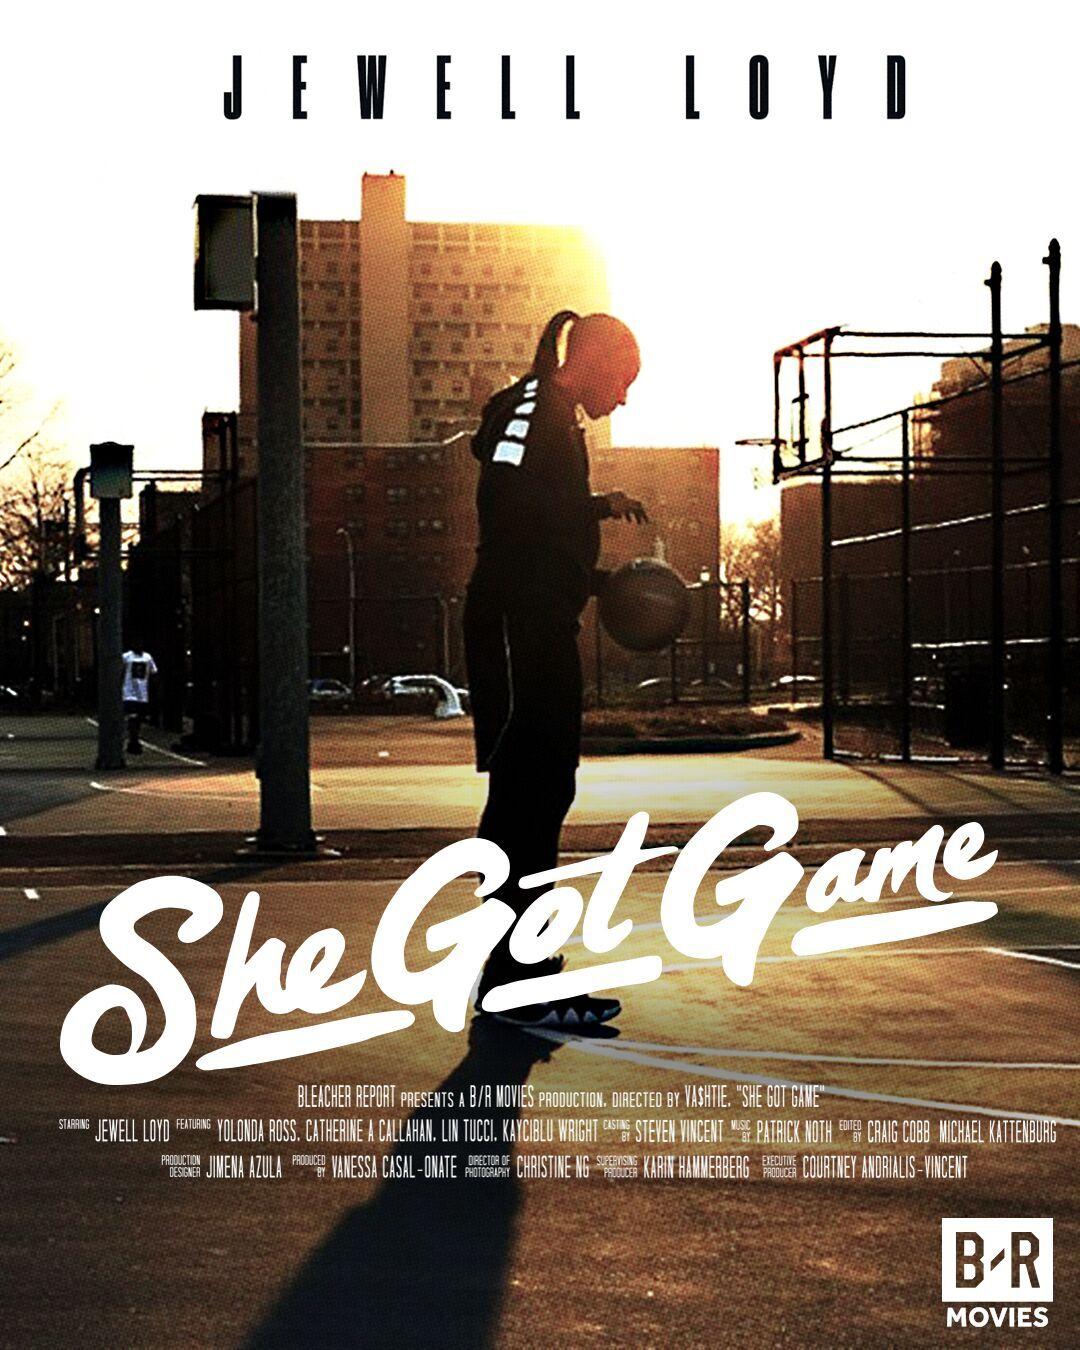 'She Got Game' A Short Film Imagines the Sequel to a